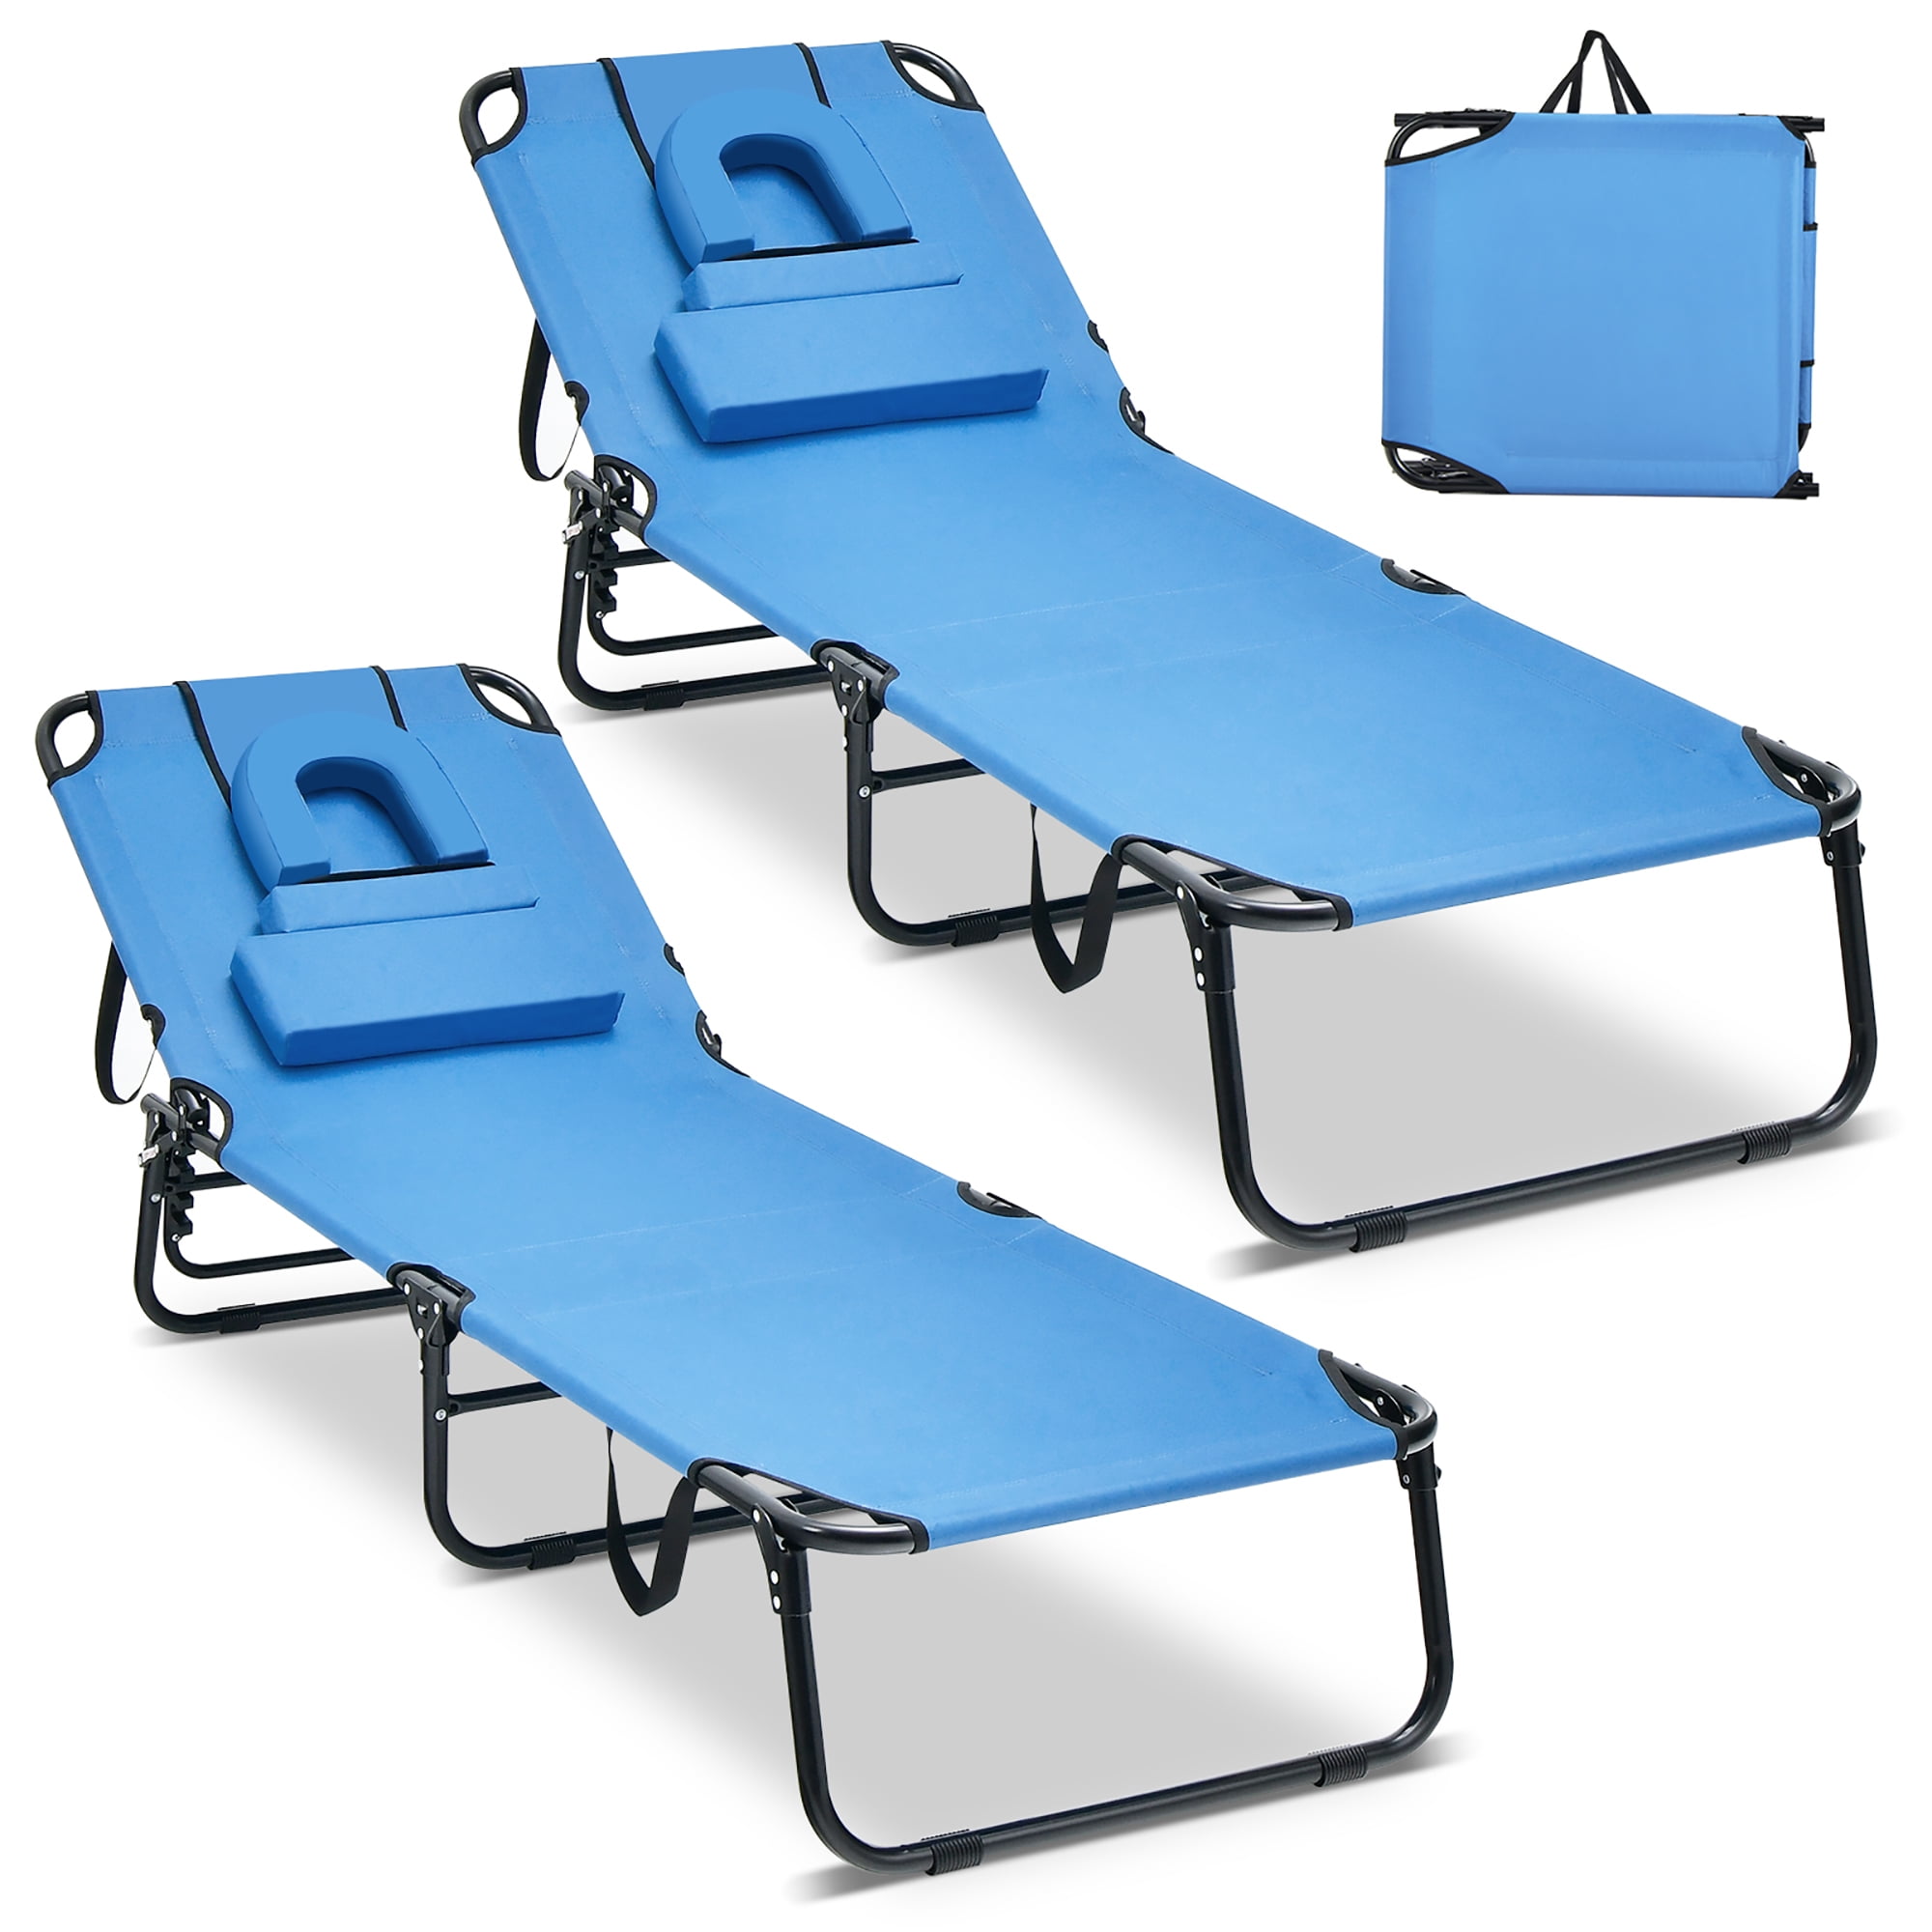 Costway 2 PCS Beach Chaise Lounge Chair with Face Hole Pillows & Adjustable Backrest Blue - image 1 of 10